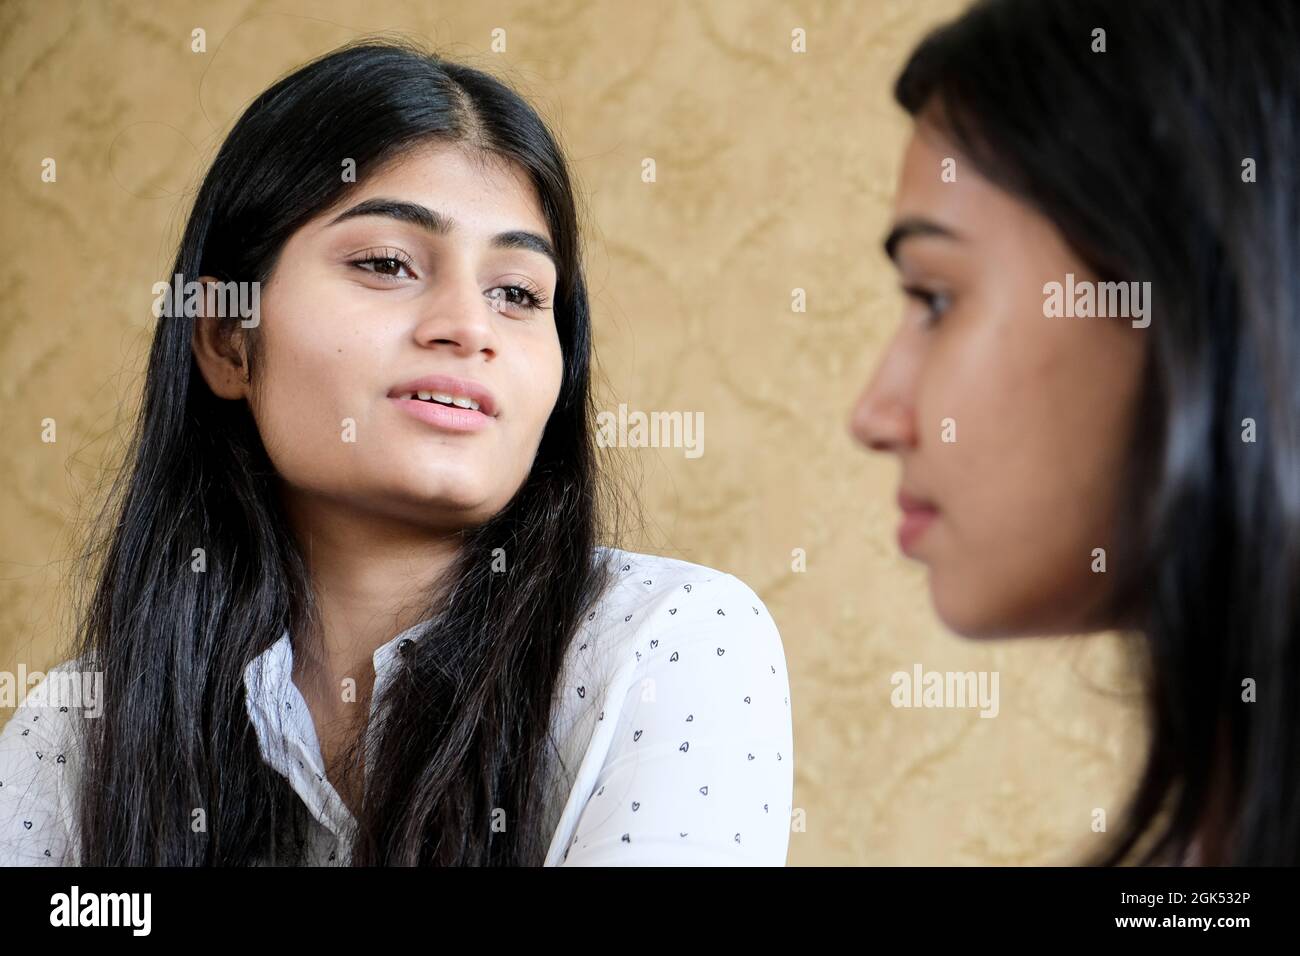 Closeup shot of a young girl talking during the conversation Stock Photo